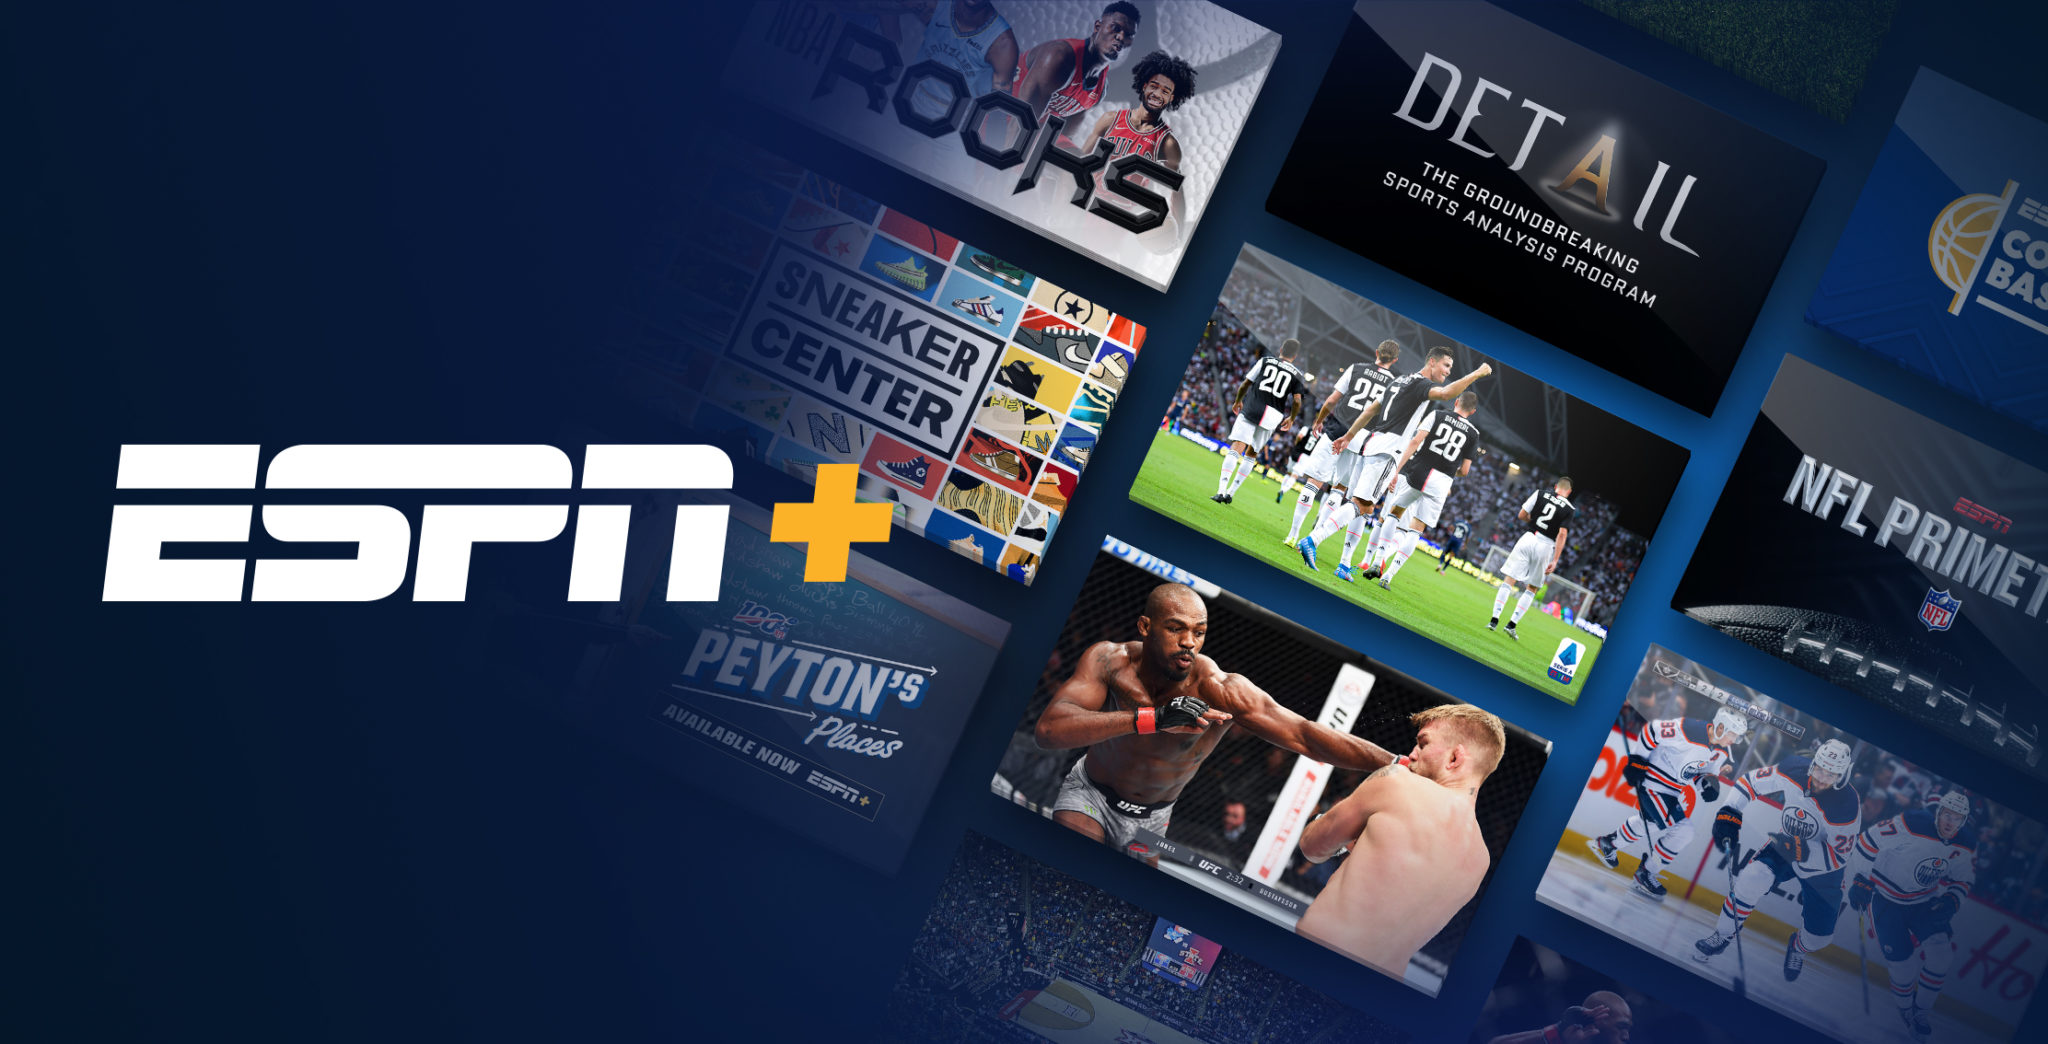 ESPN Plus is getting a $3 price hike on August 23rd